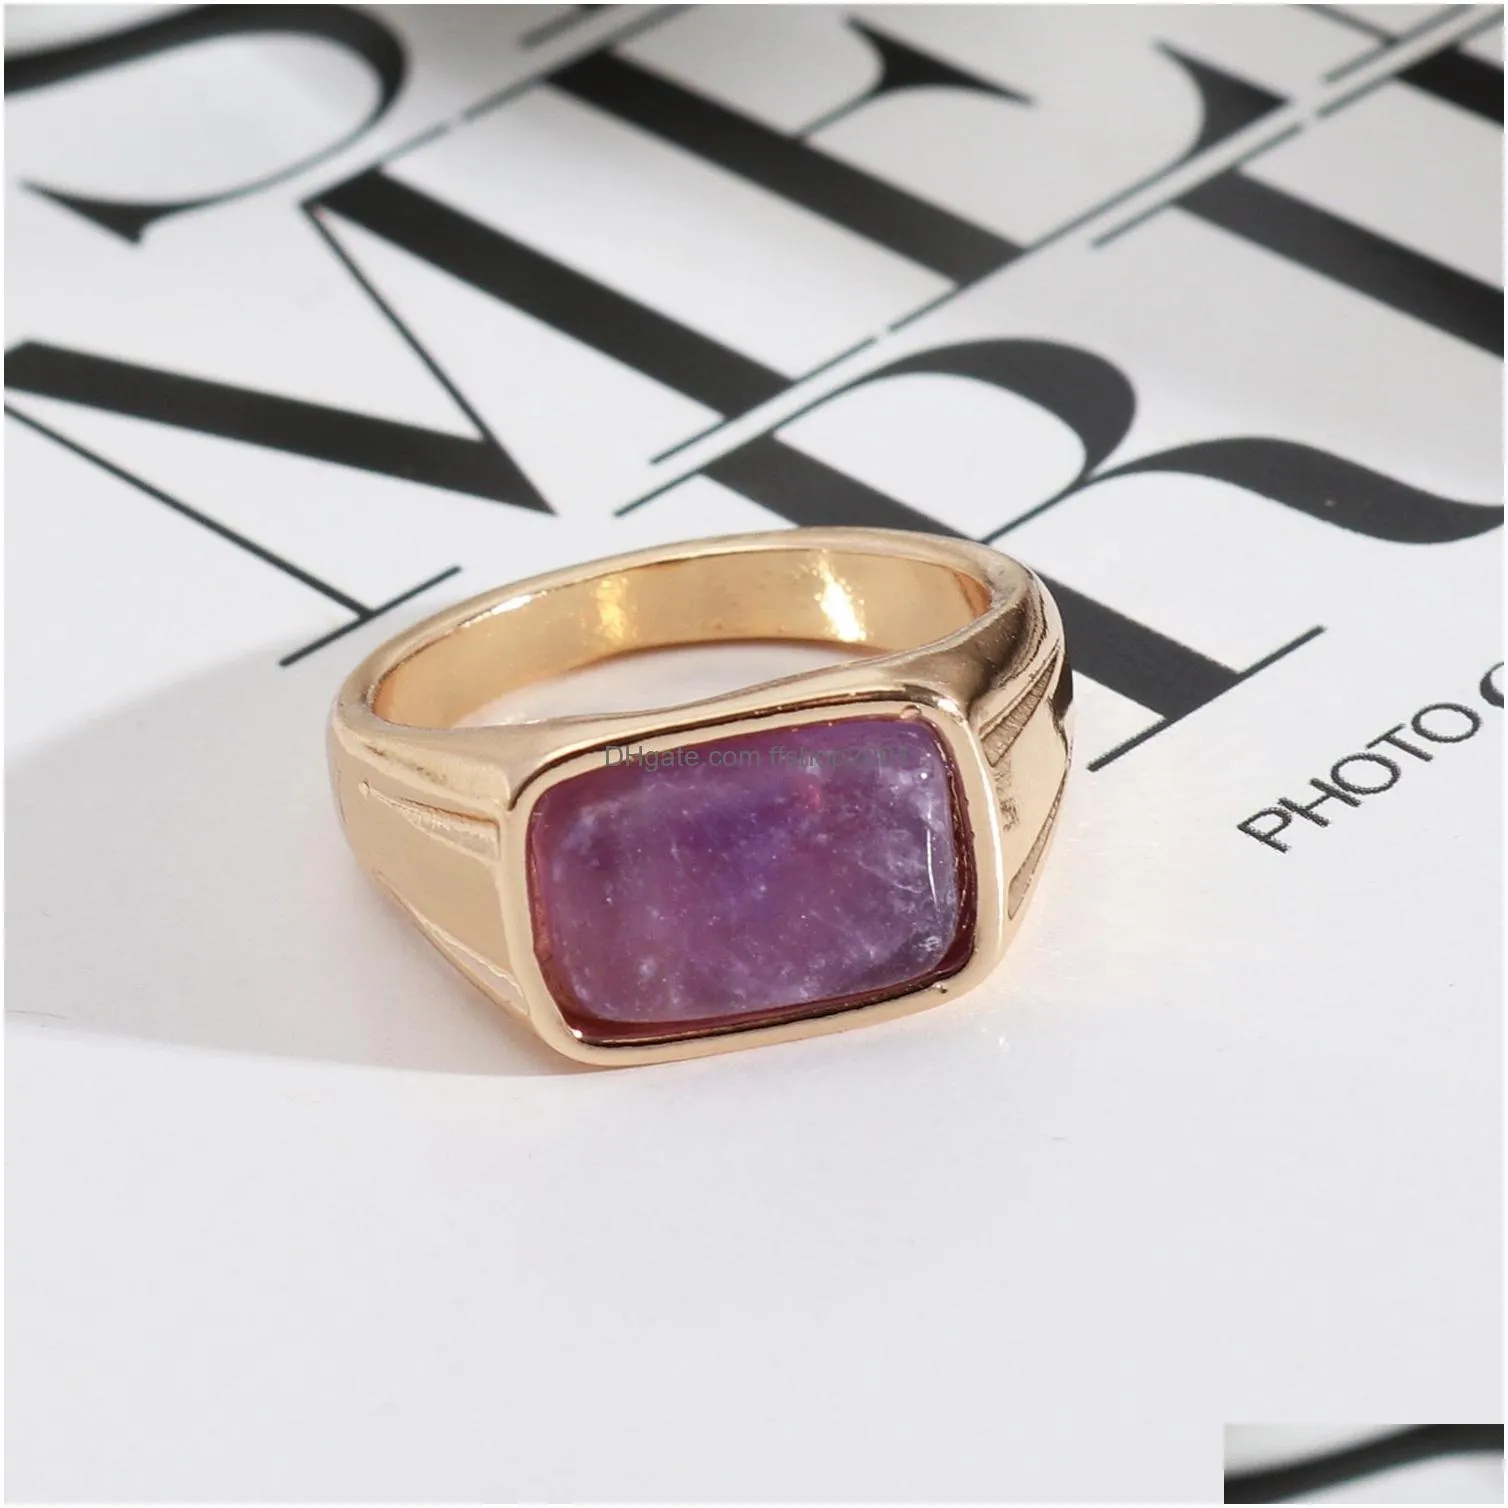 natural rectangle stone rings lapis lazuli amethyst malachite stone fashion inner dia 17mm gold color band jewelry for women